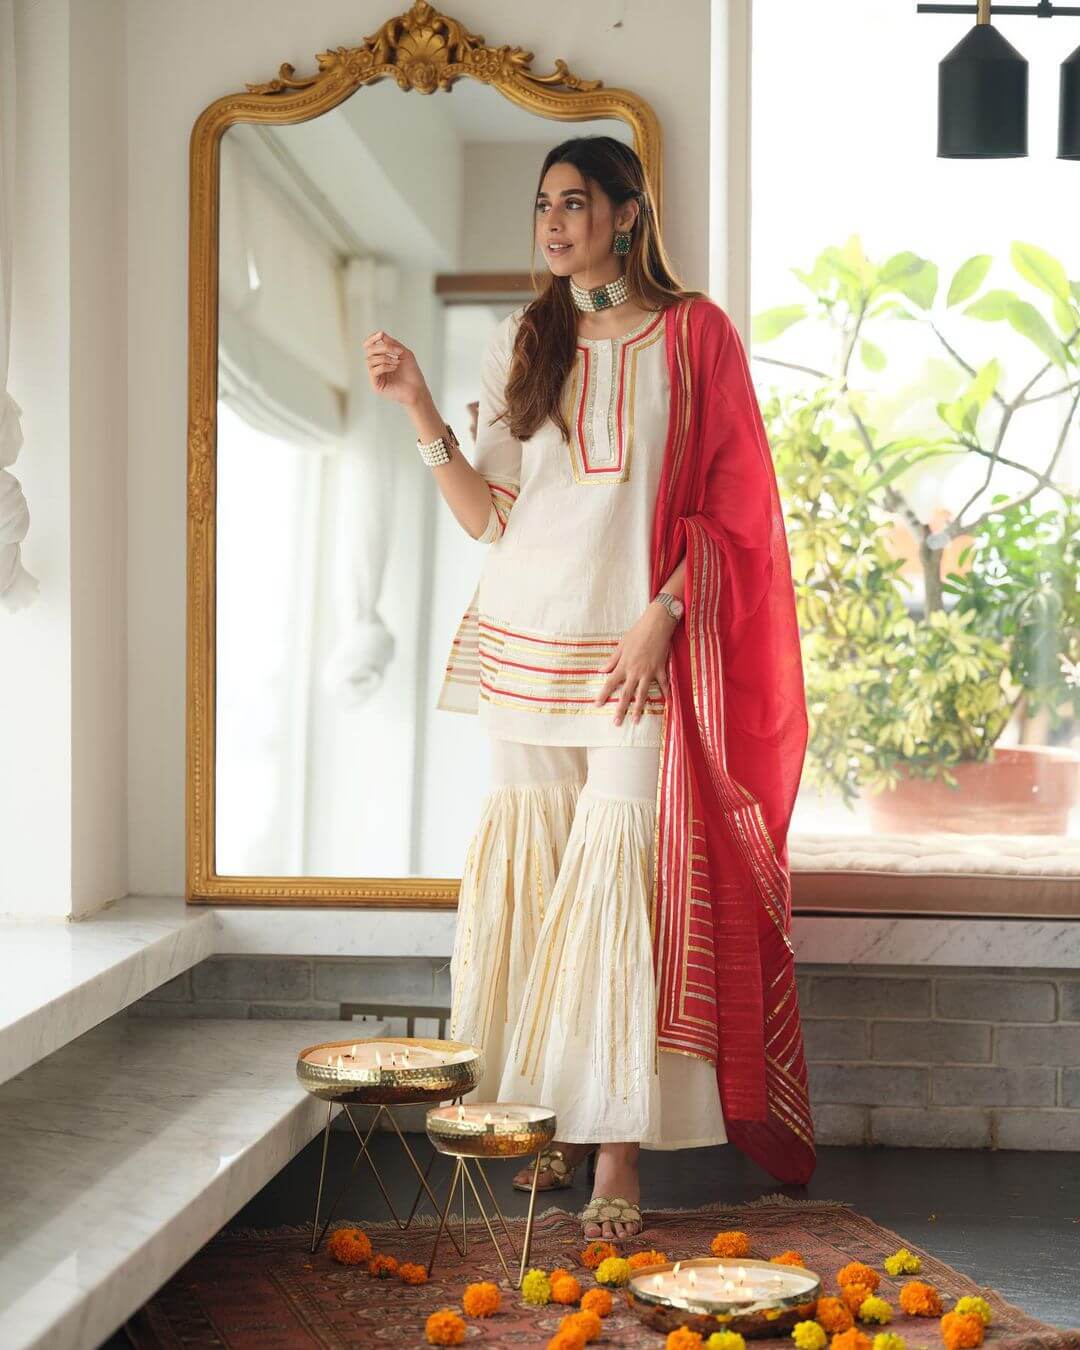 20+ Trending Diwali Outfit Ideas for you to choose from White Kurti with Red Dupatta for an Effortlessly elegant look